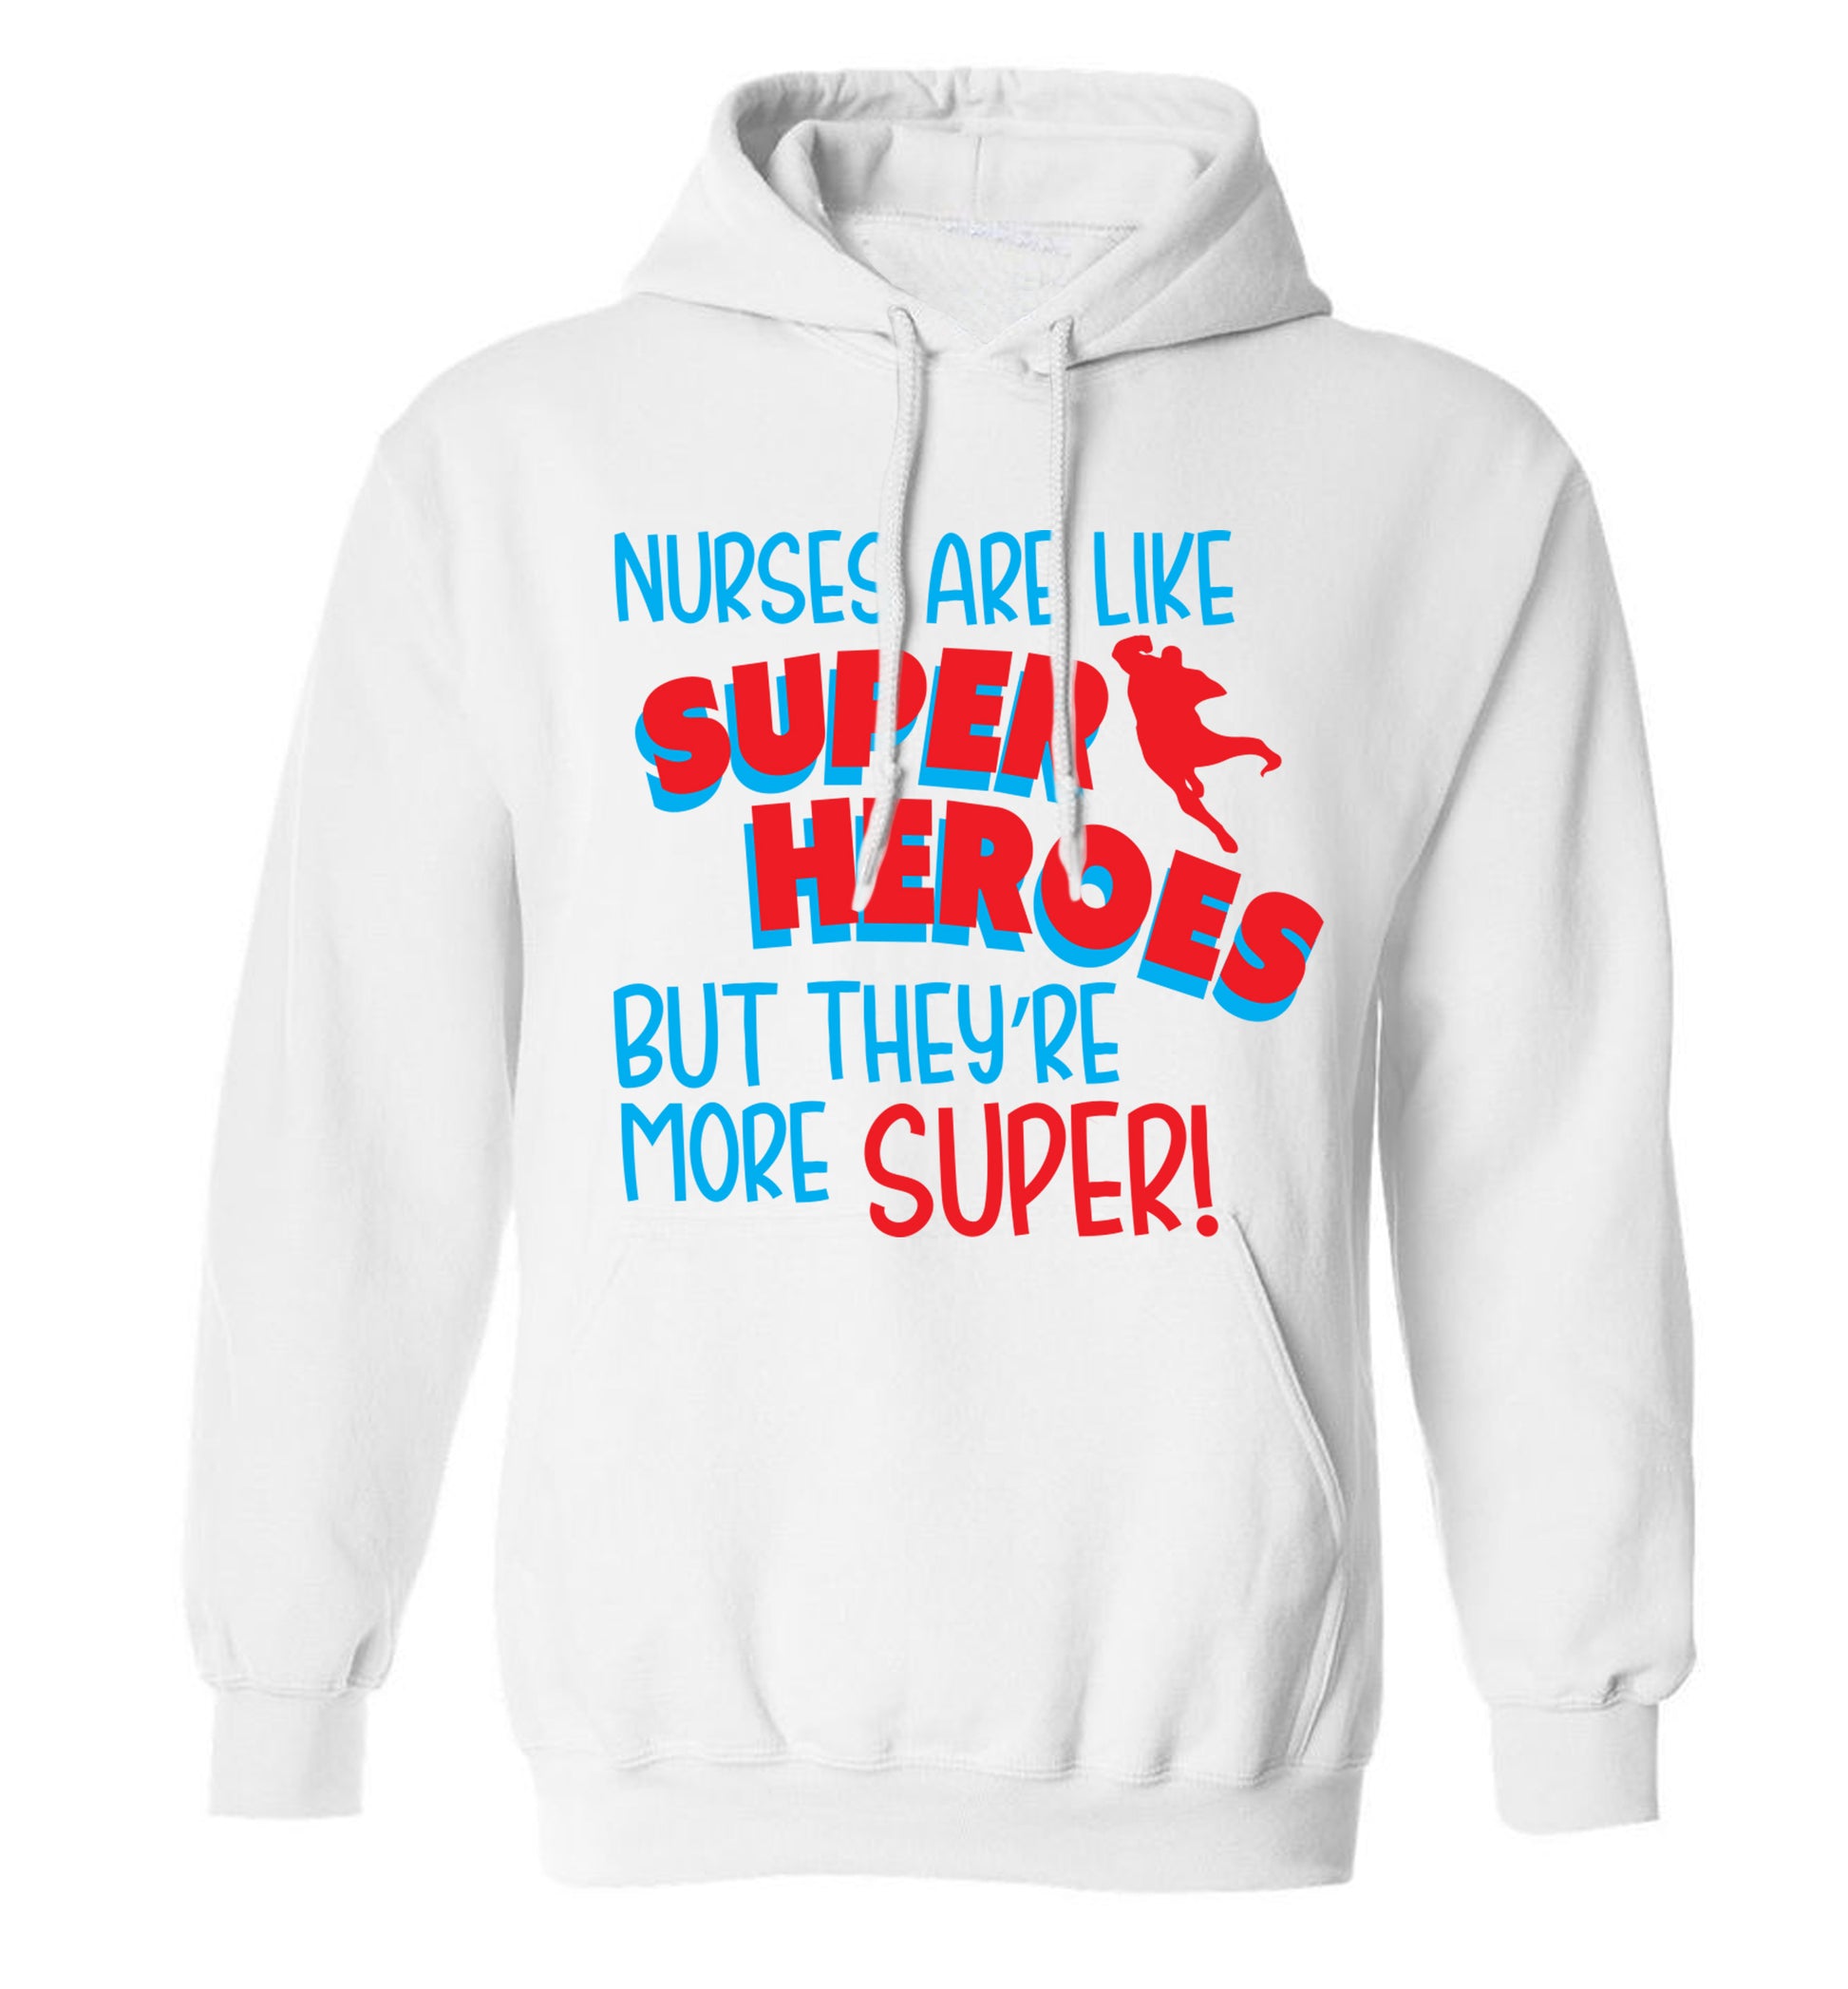 Nurses are like superheros but they're more super adults unisex white hoodie 2XL